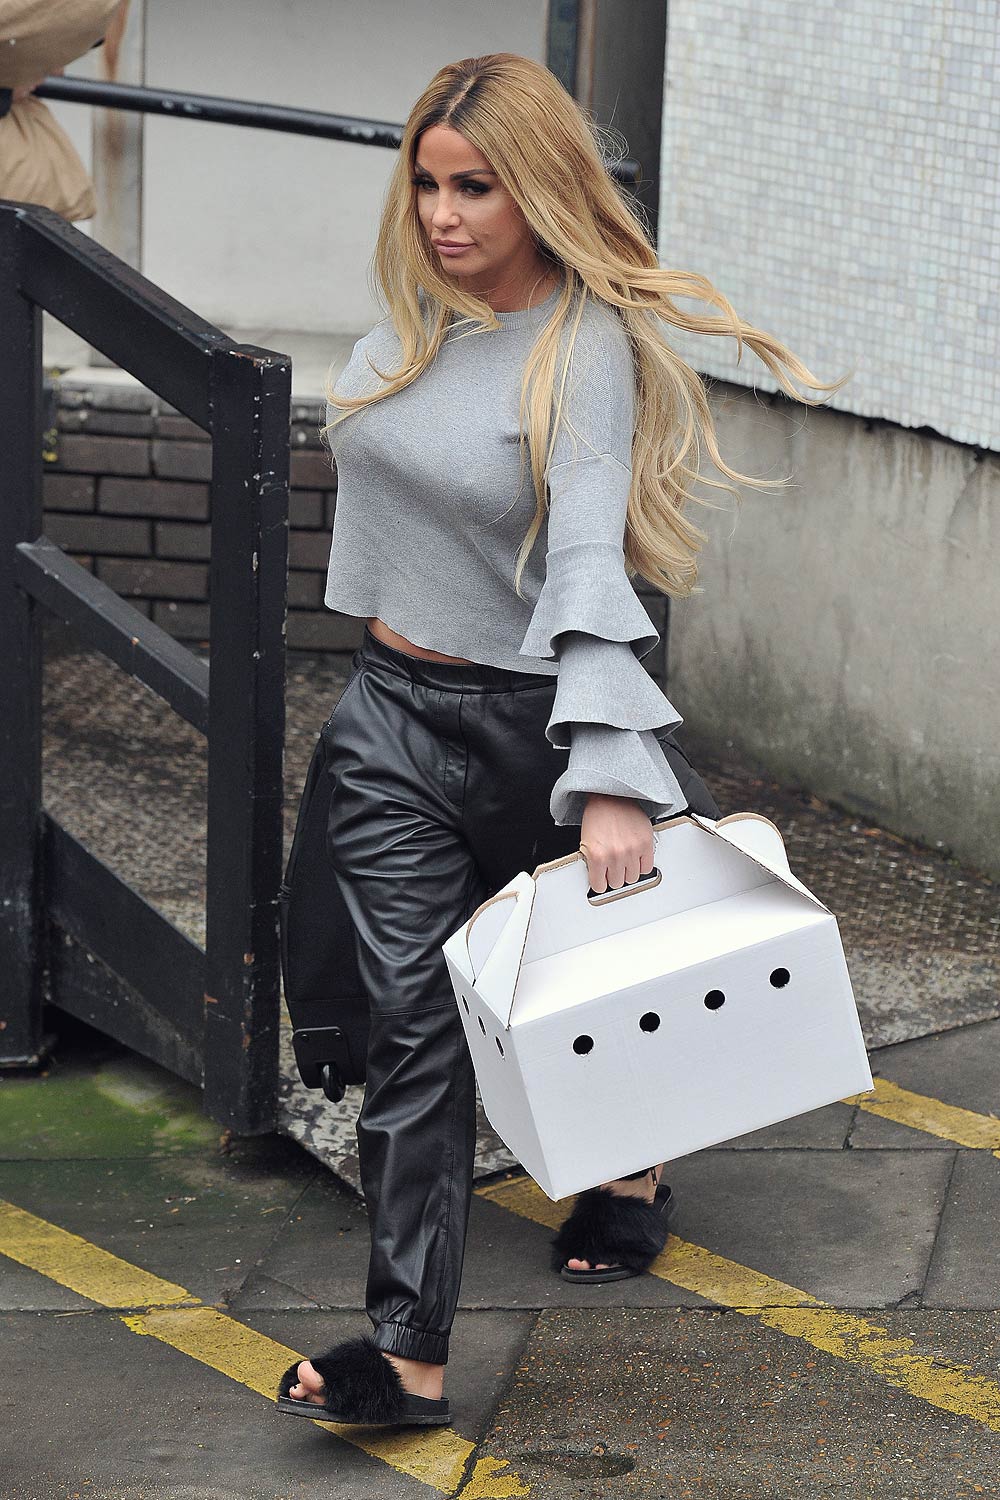 Katie Price seen at the ITV Studios after the Loose Women show